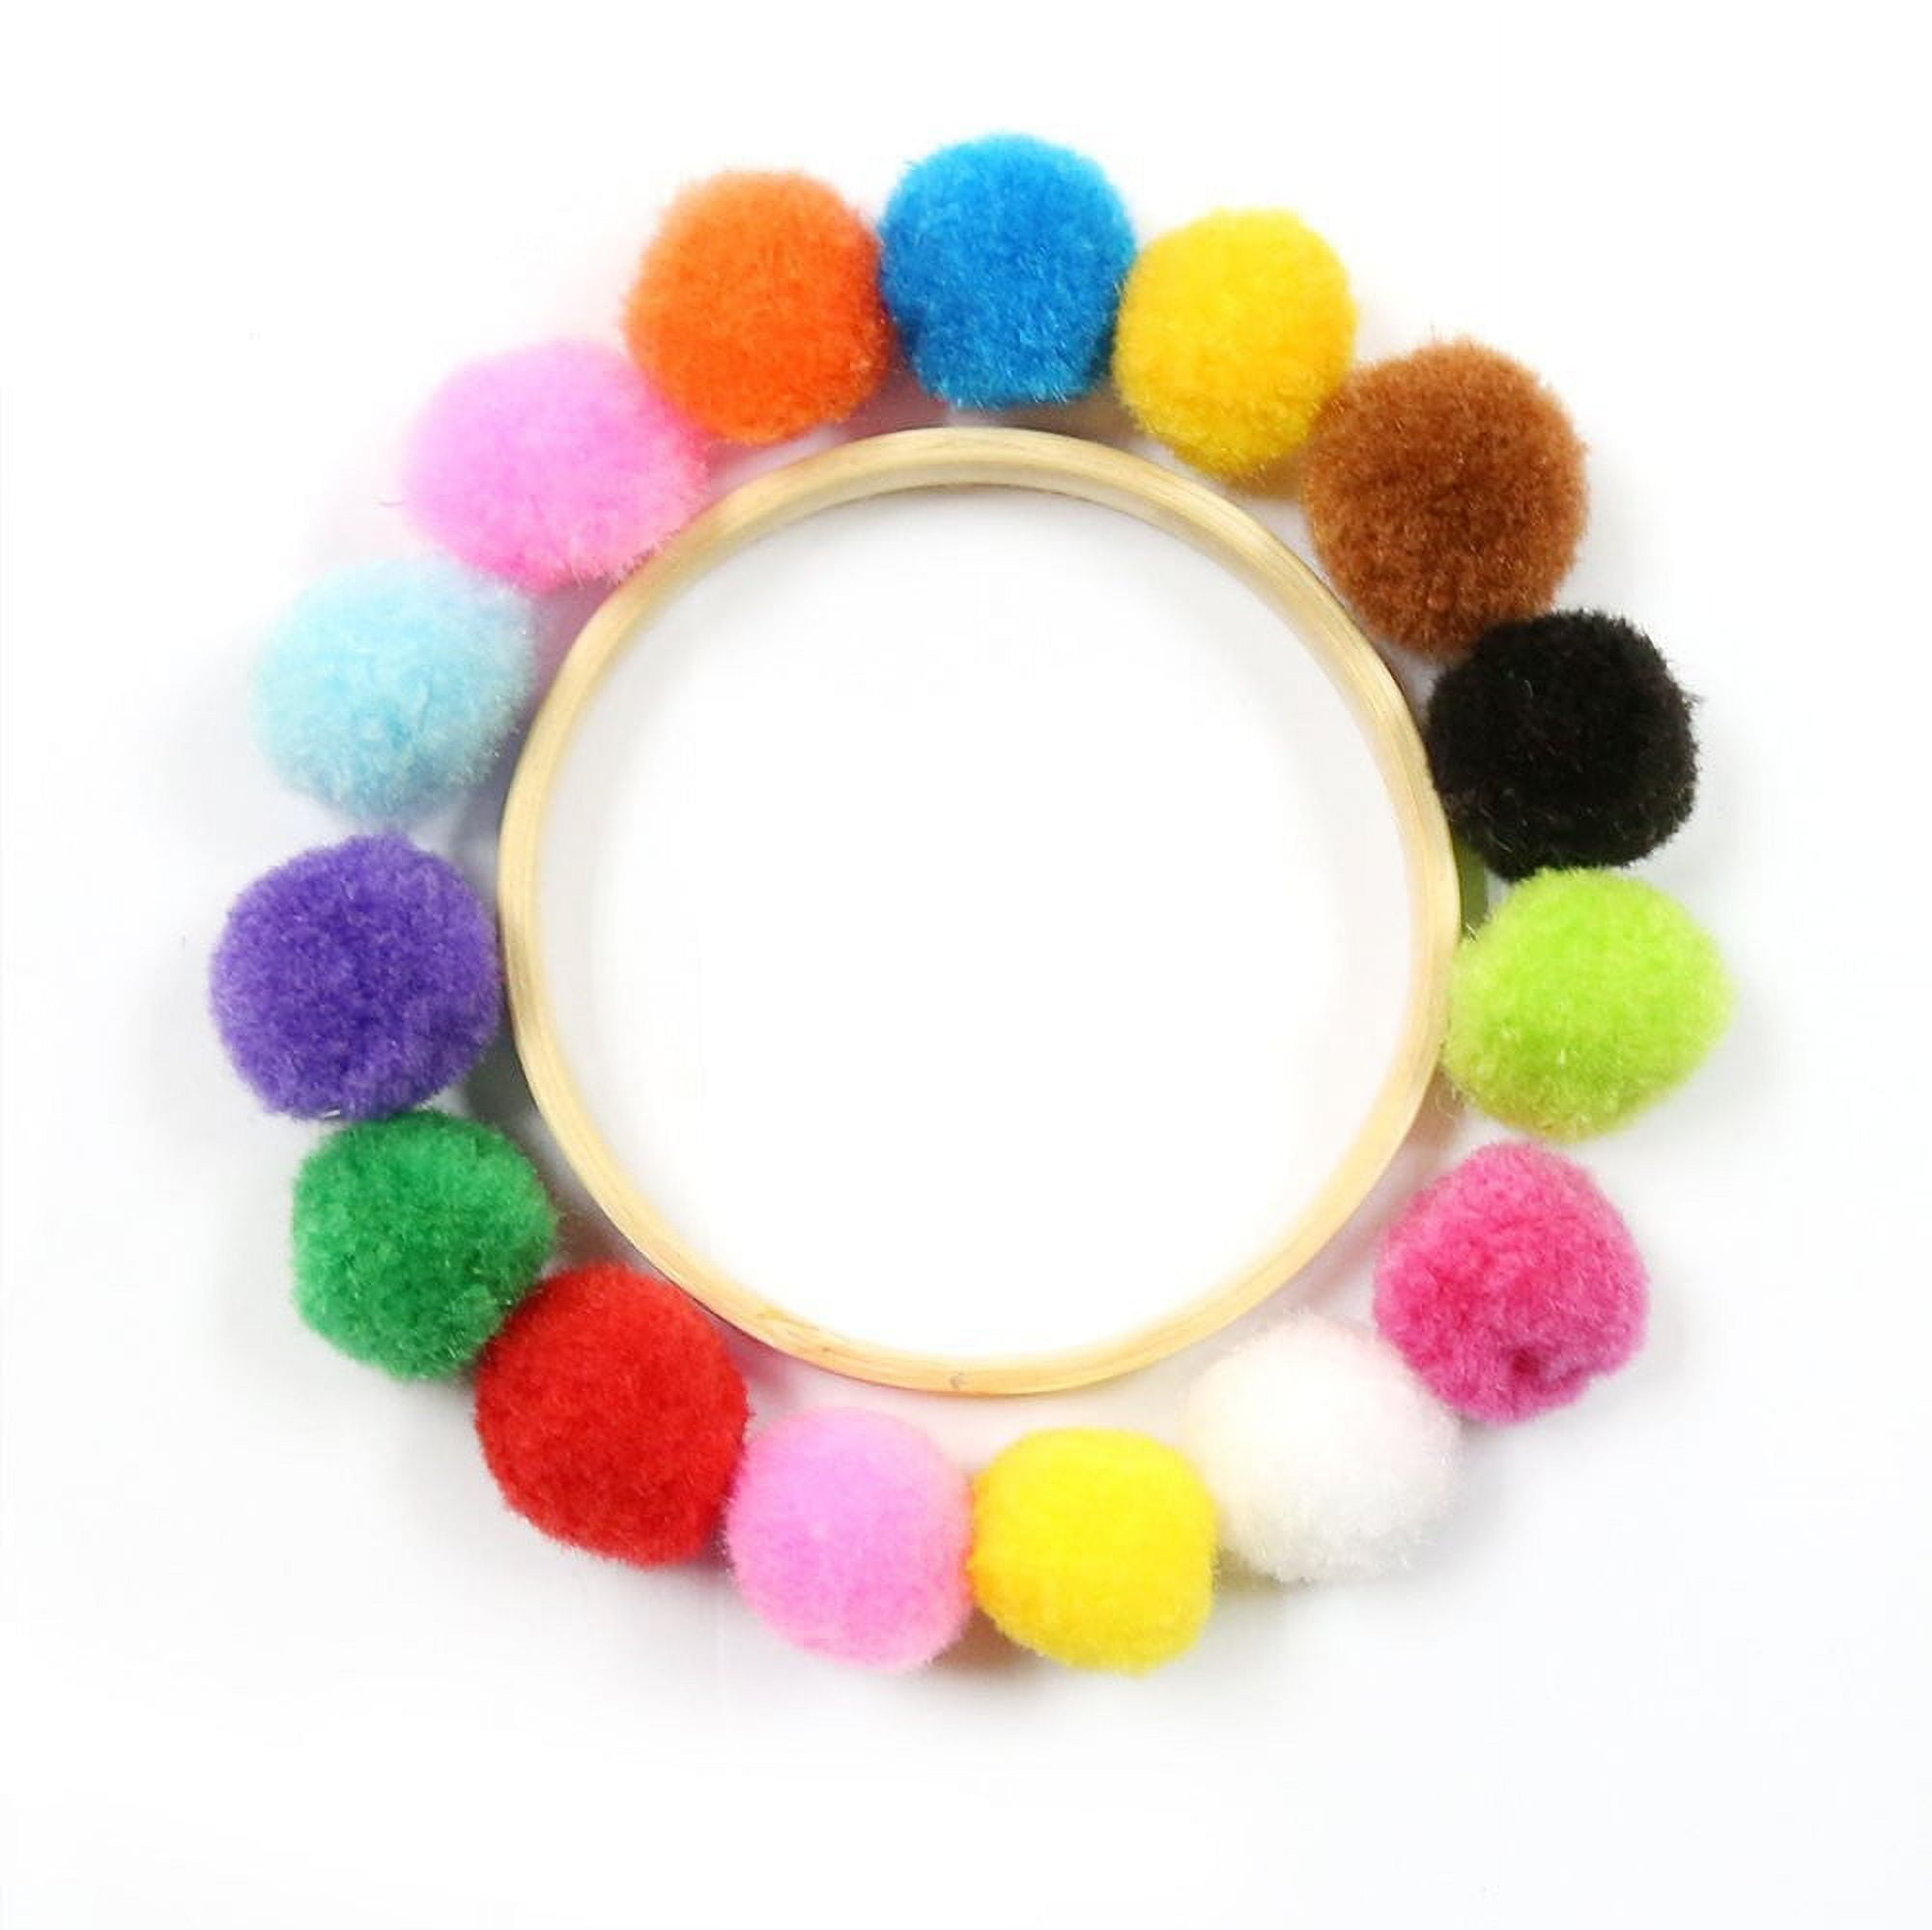 Assorted Pompom 8/10/15/20/25/30mm Fluffy Soft Pom Poms Balls Mixed Pompoms  for DIY Crafts Wedding Decor Kid Toy Sewing Supplies